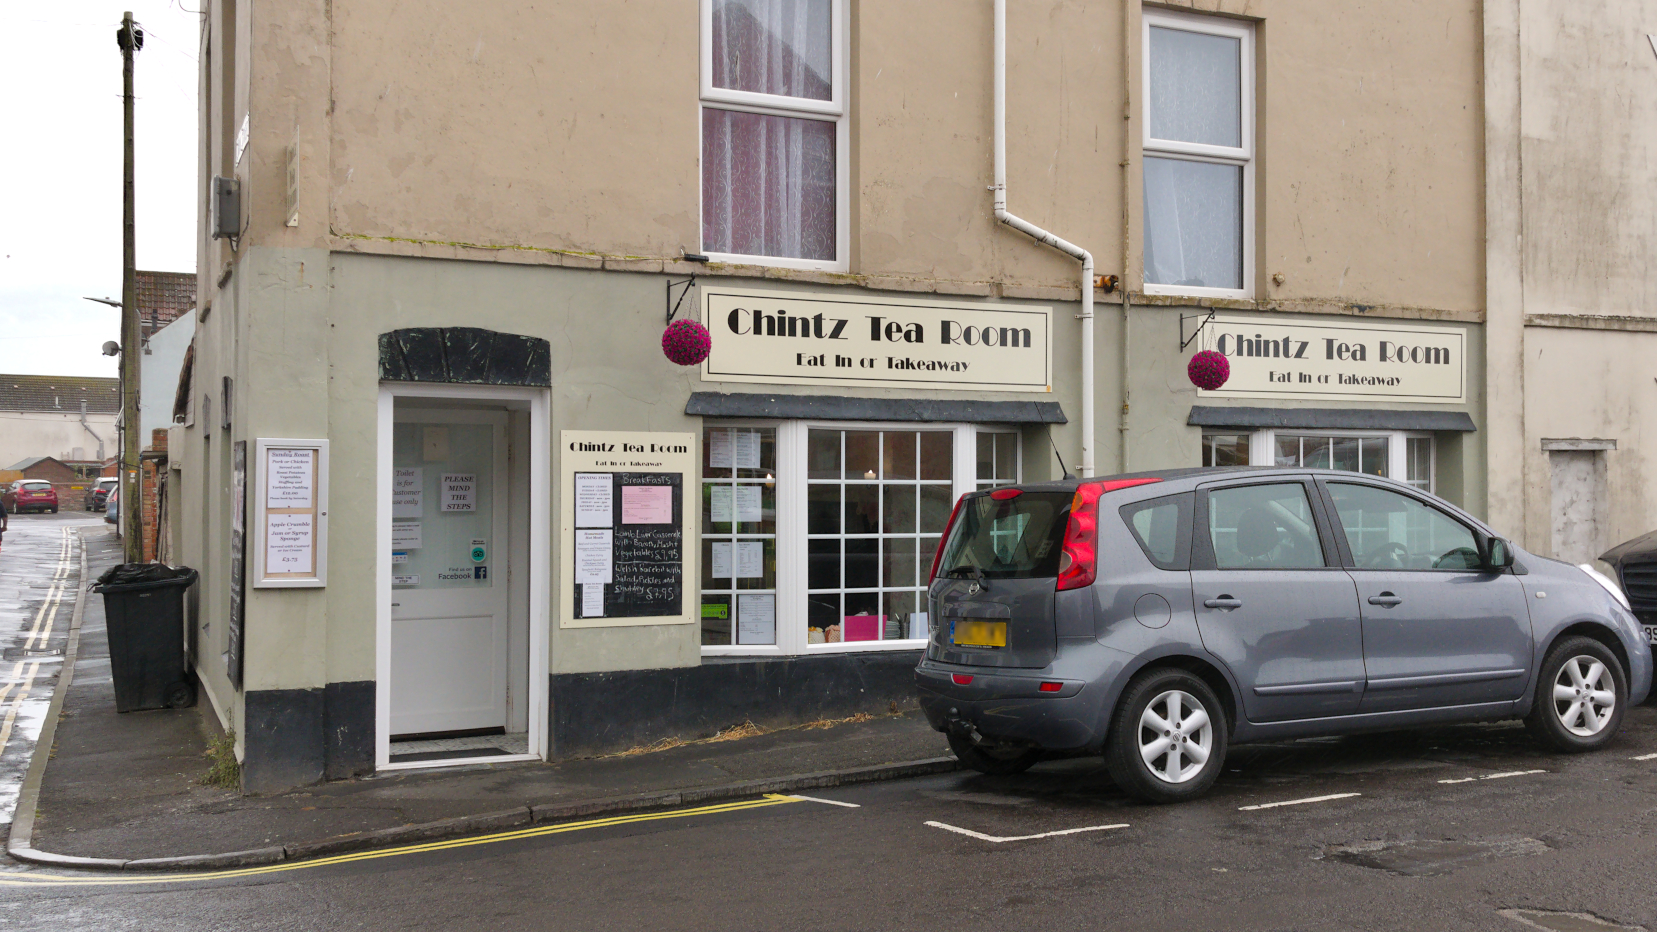 Chintz Tea Room viewed from the street.